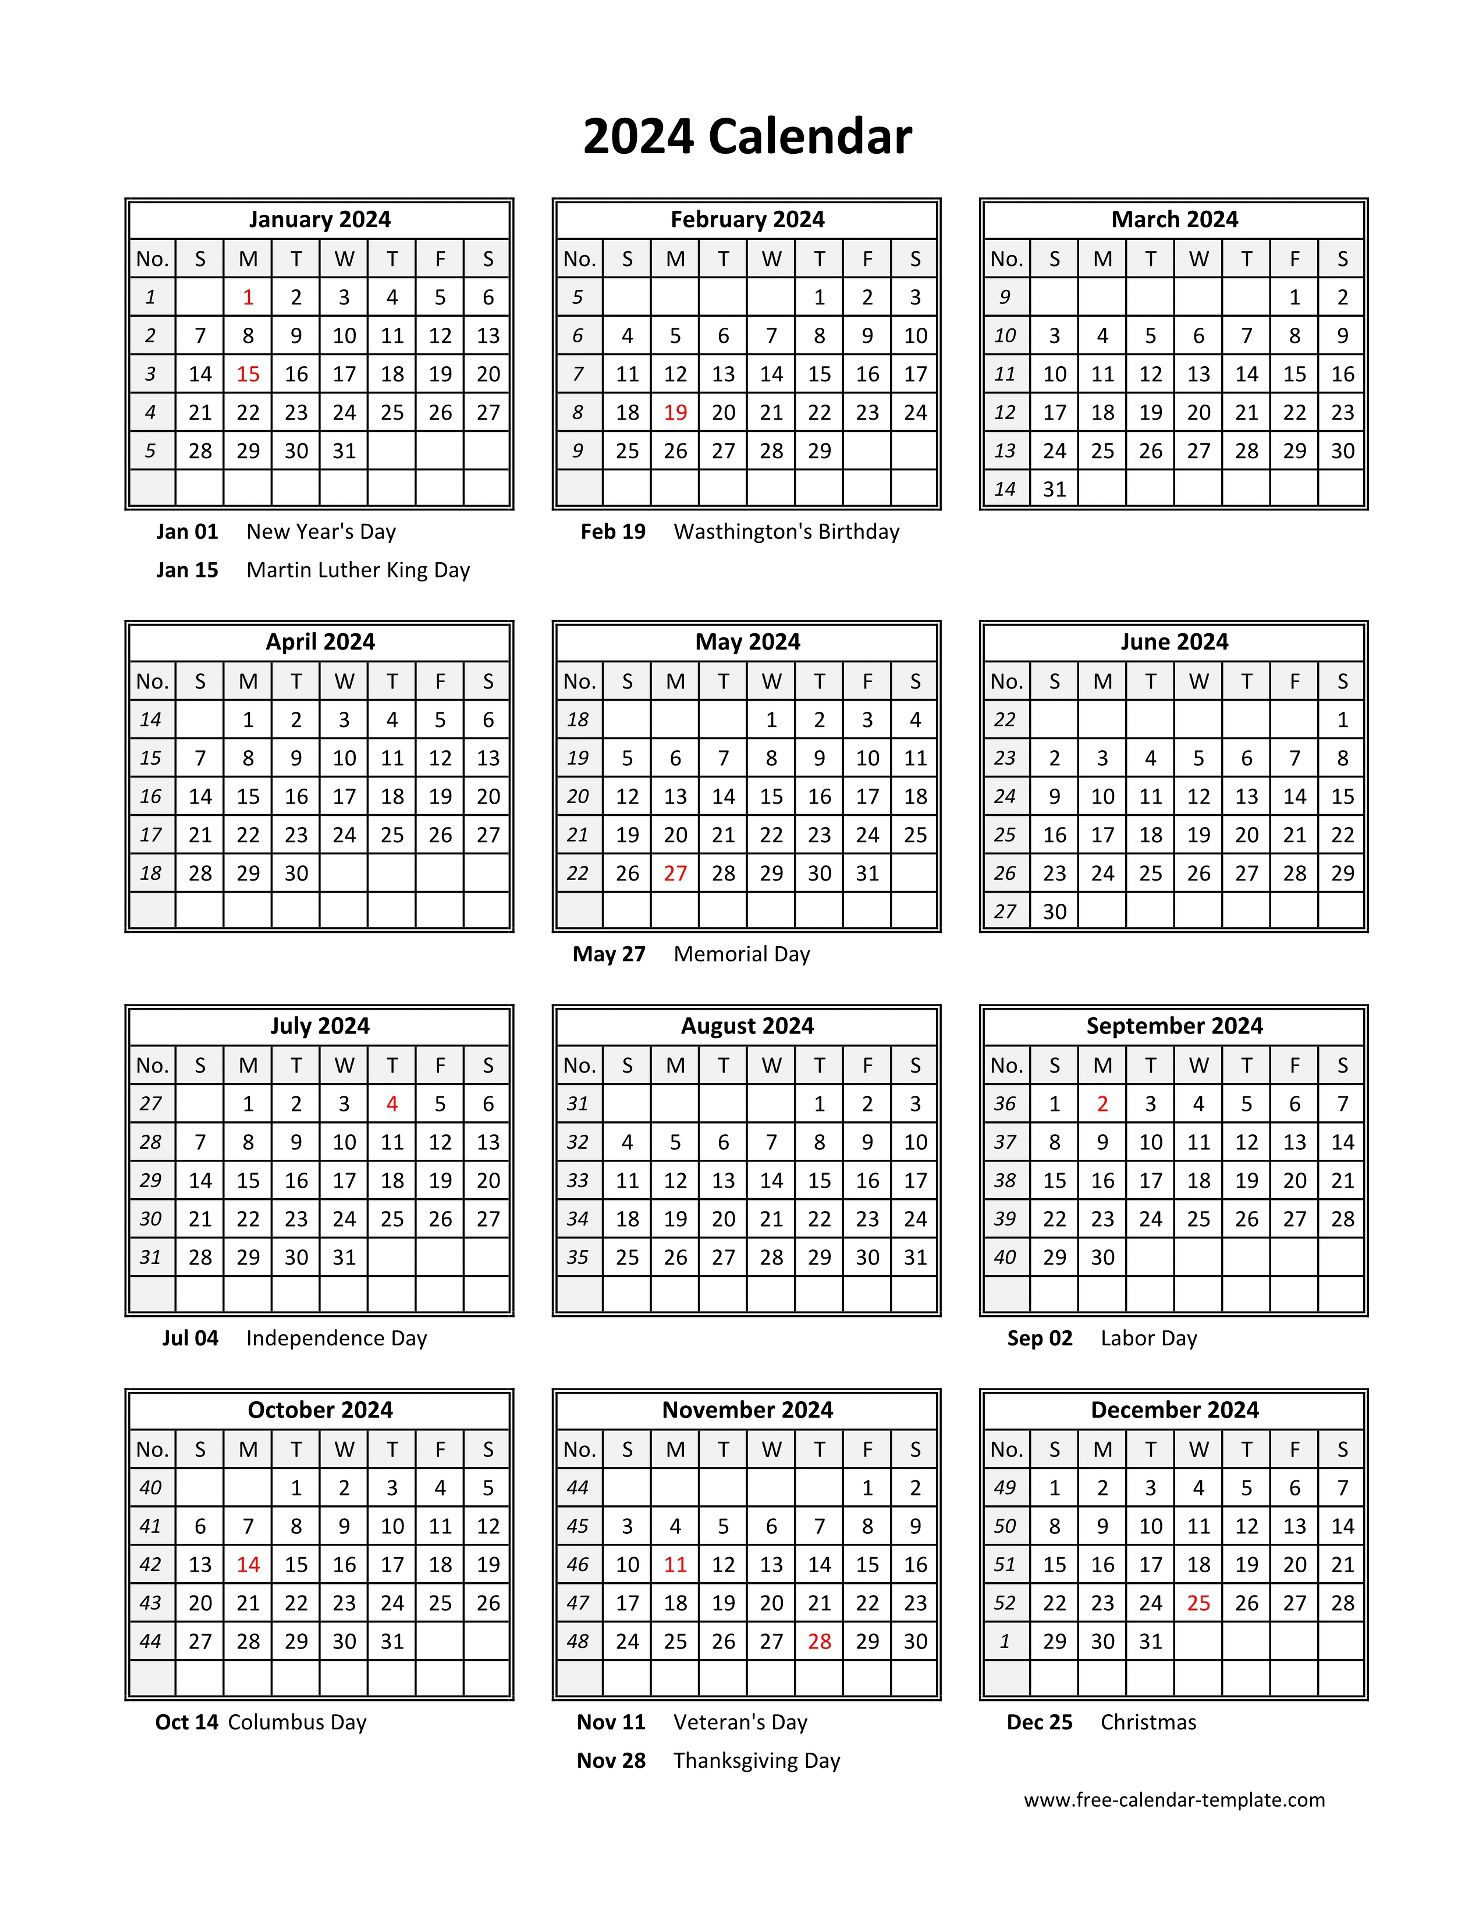 Yearly Printable Calendar 2024 With Holidays | Free-Calendar | Printable Calendar 2024 Vertical